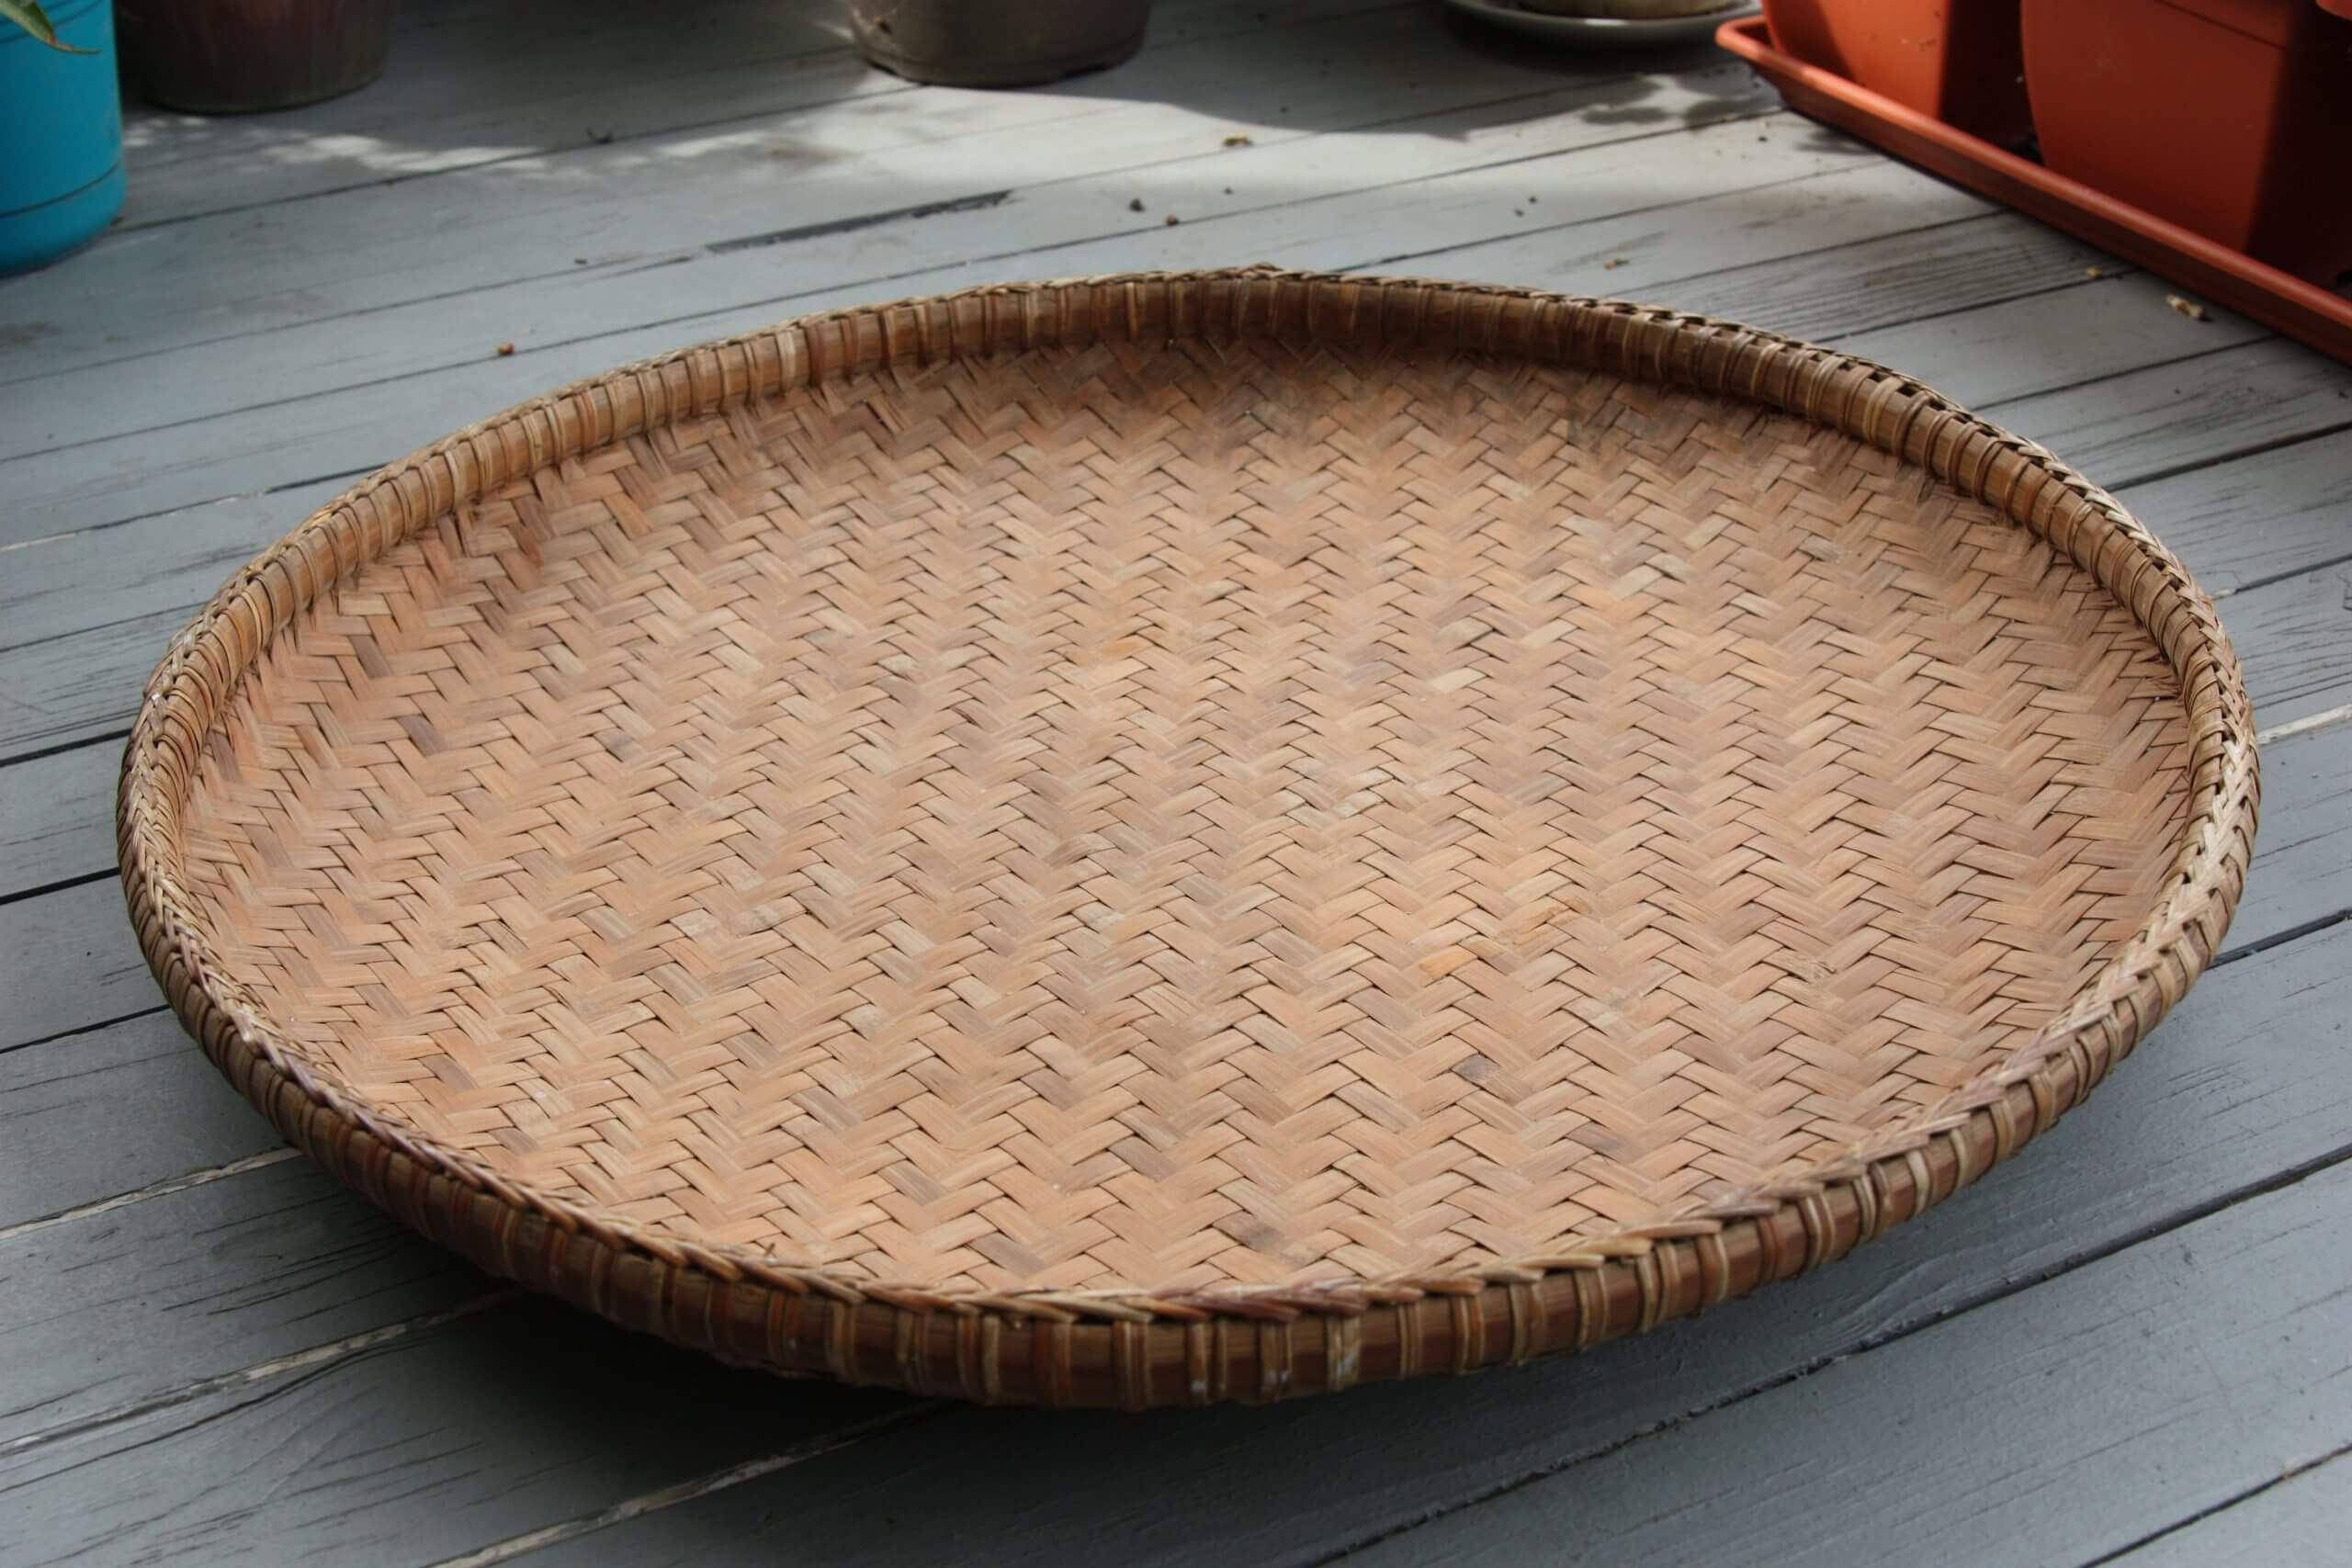 This Indonesian winnowing basket, called a Nyiru, was created for rice.